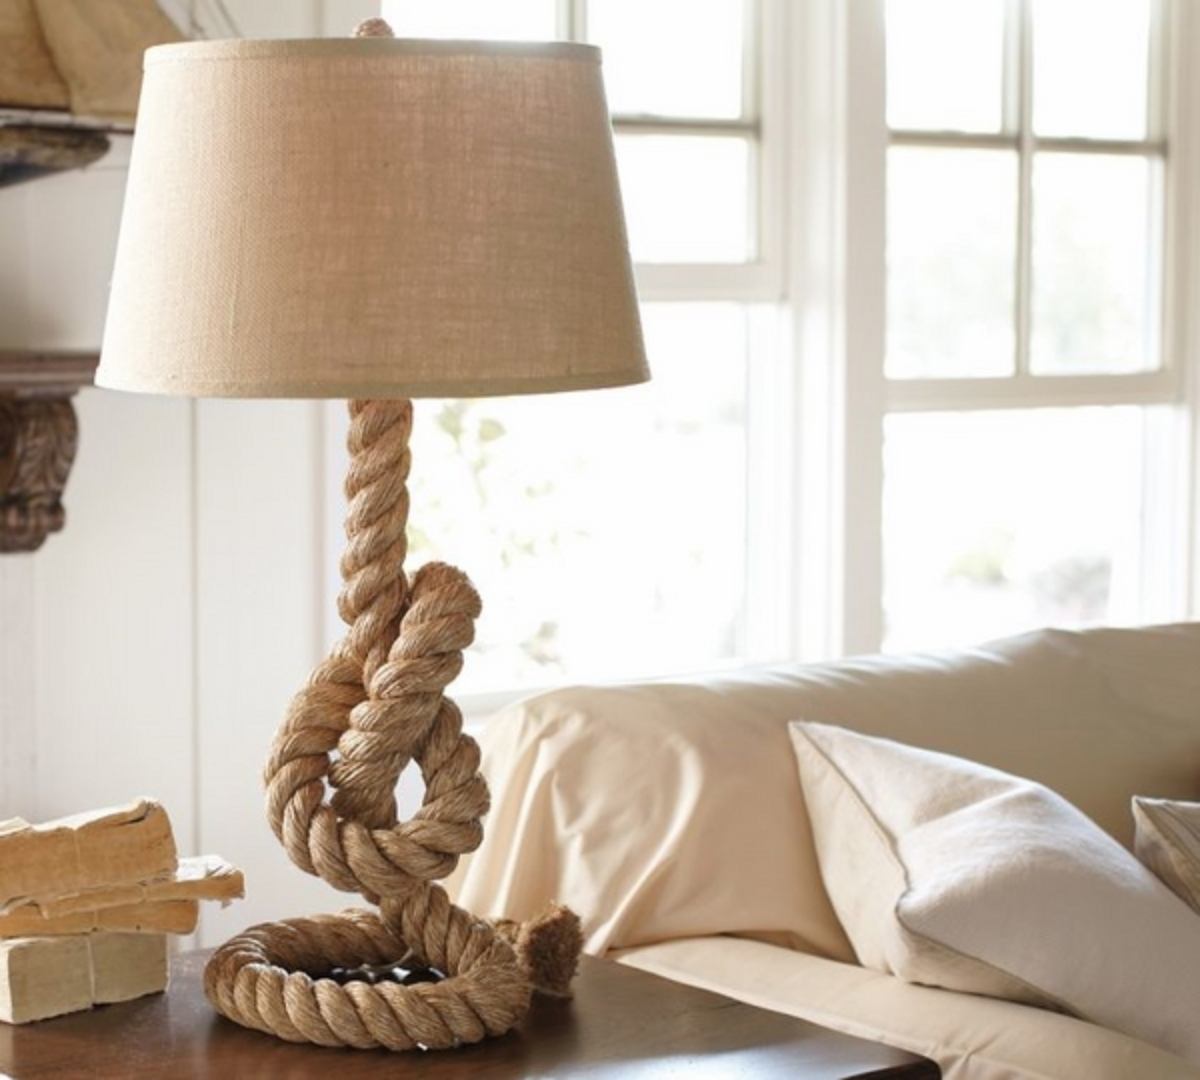 Nautical Light Fixtures The Best Idea, Marine Style Table Lamps